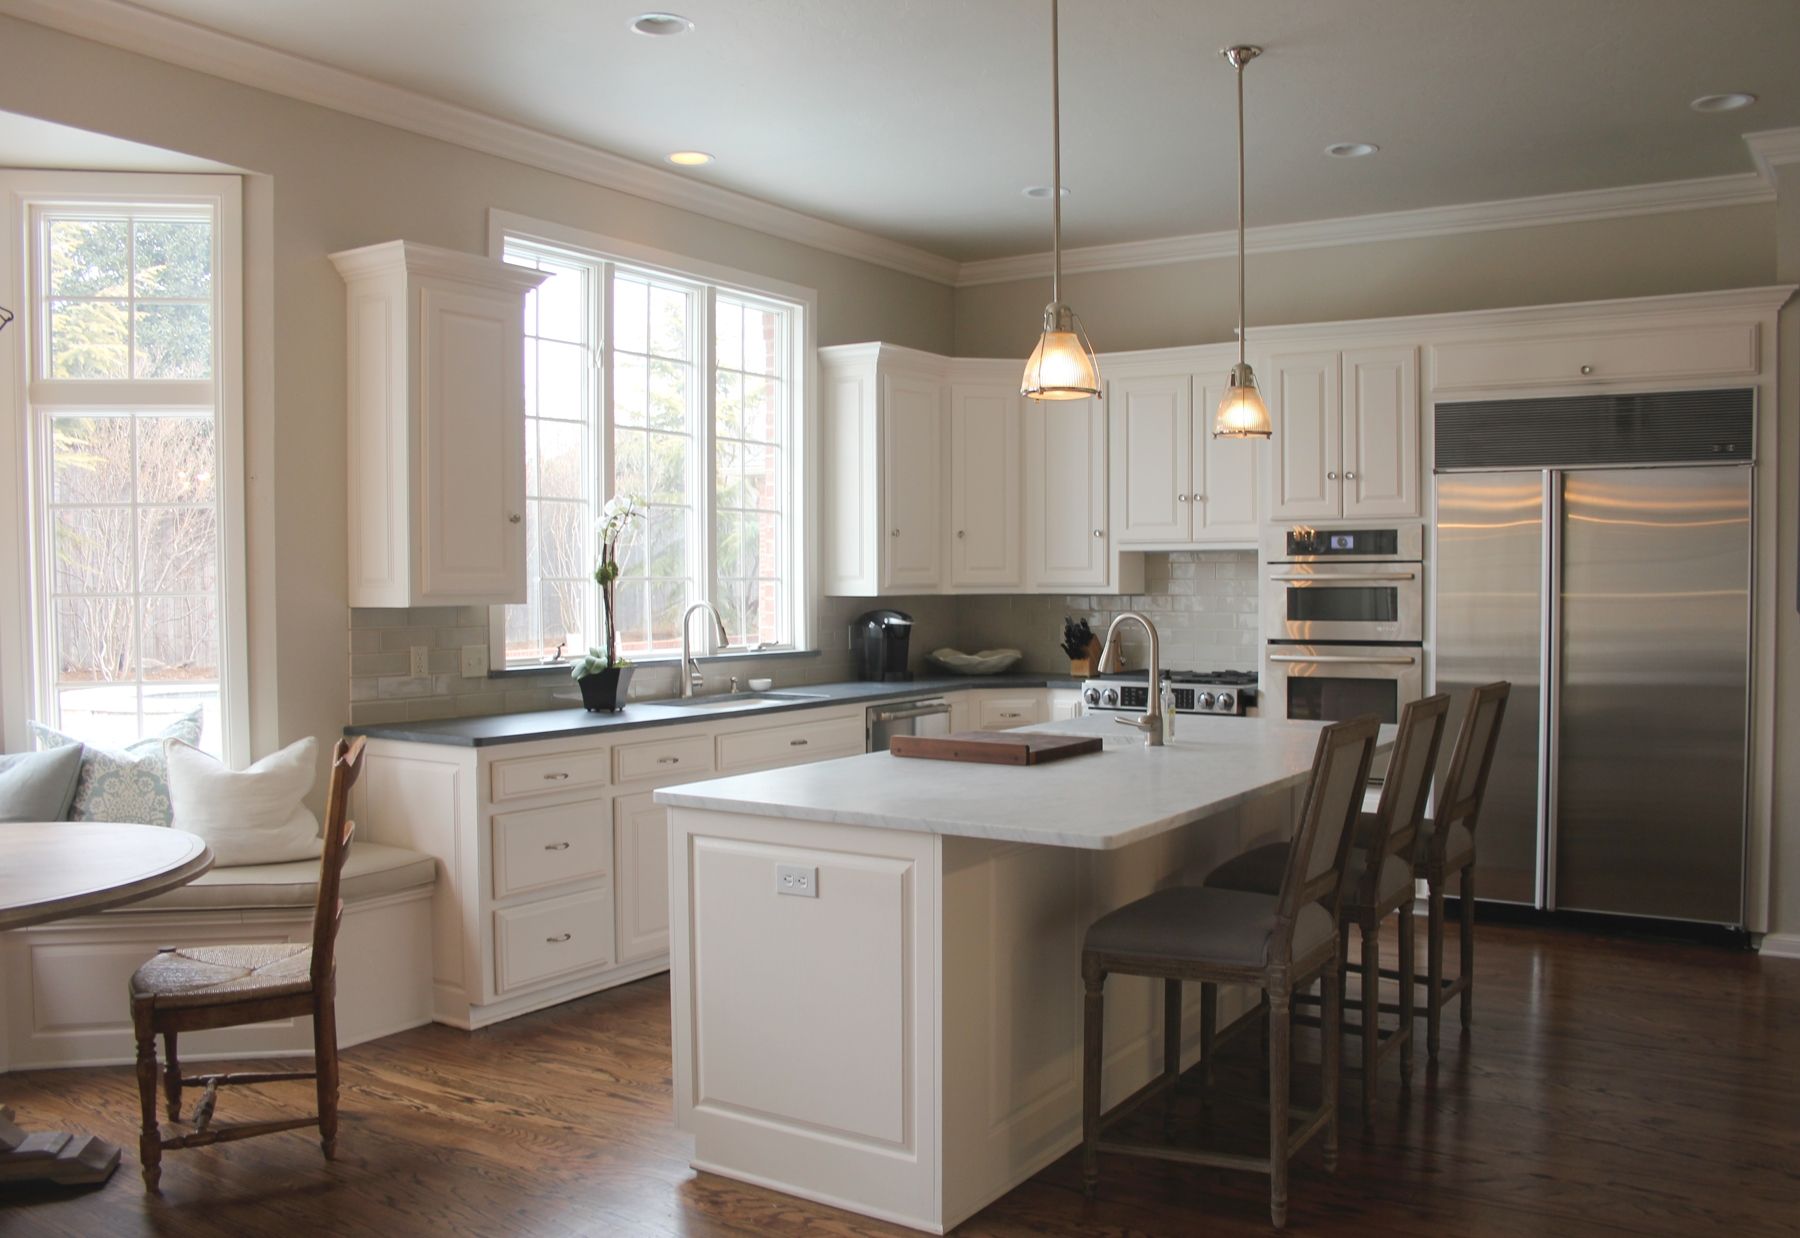 Stylish White Dove Cabinets With Revere Pewter Walls For A Modern Kitchen 1 